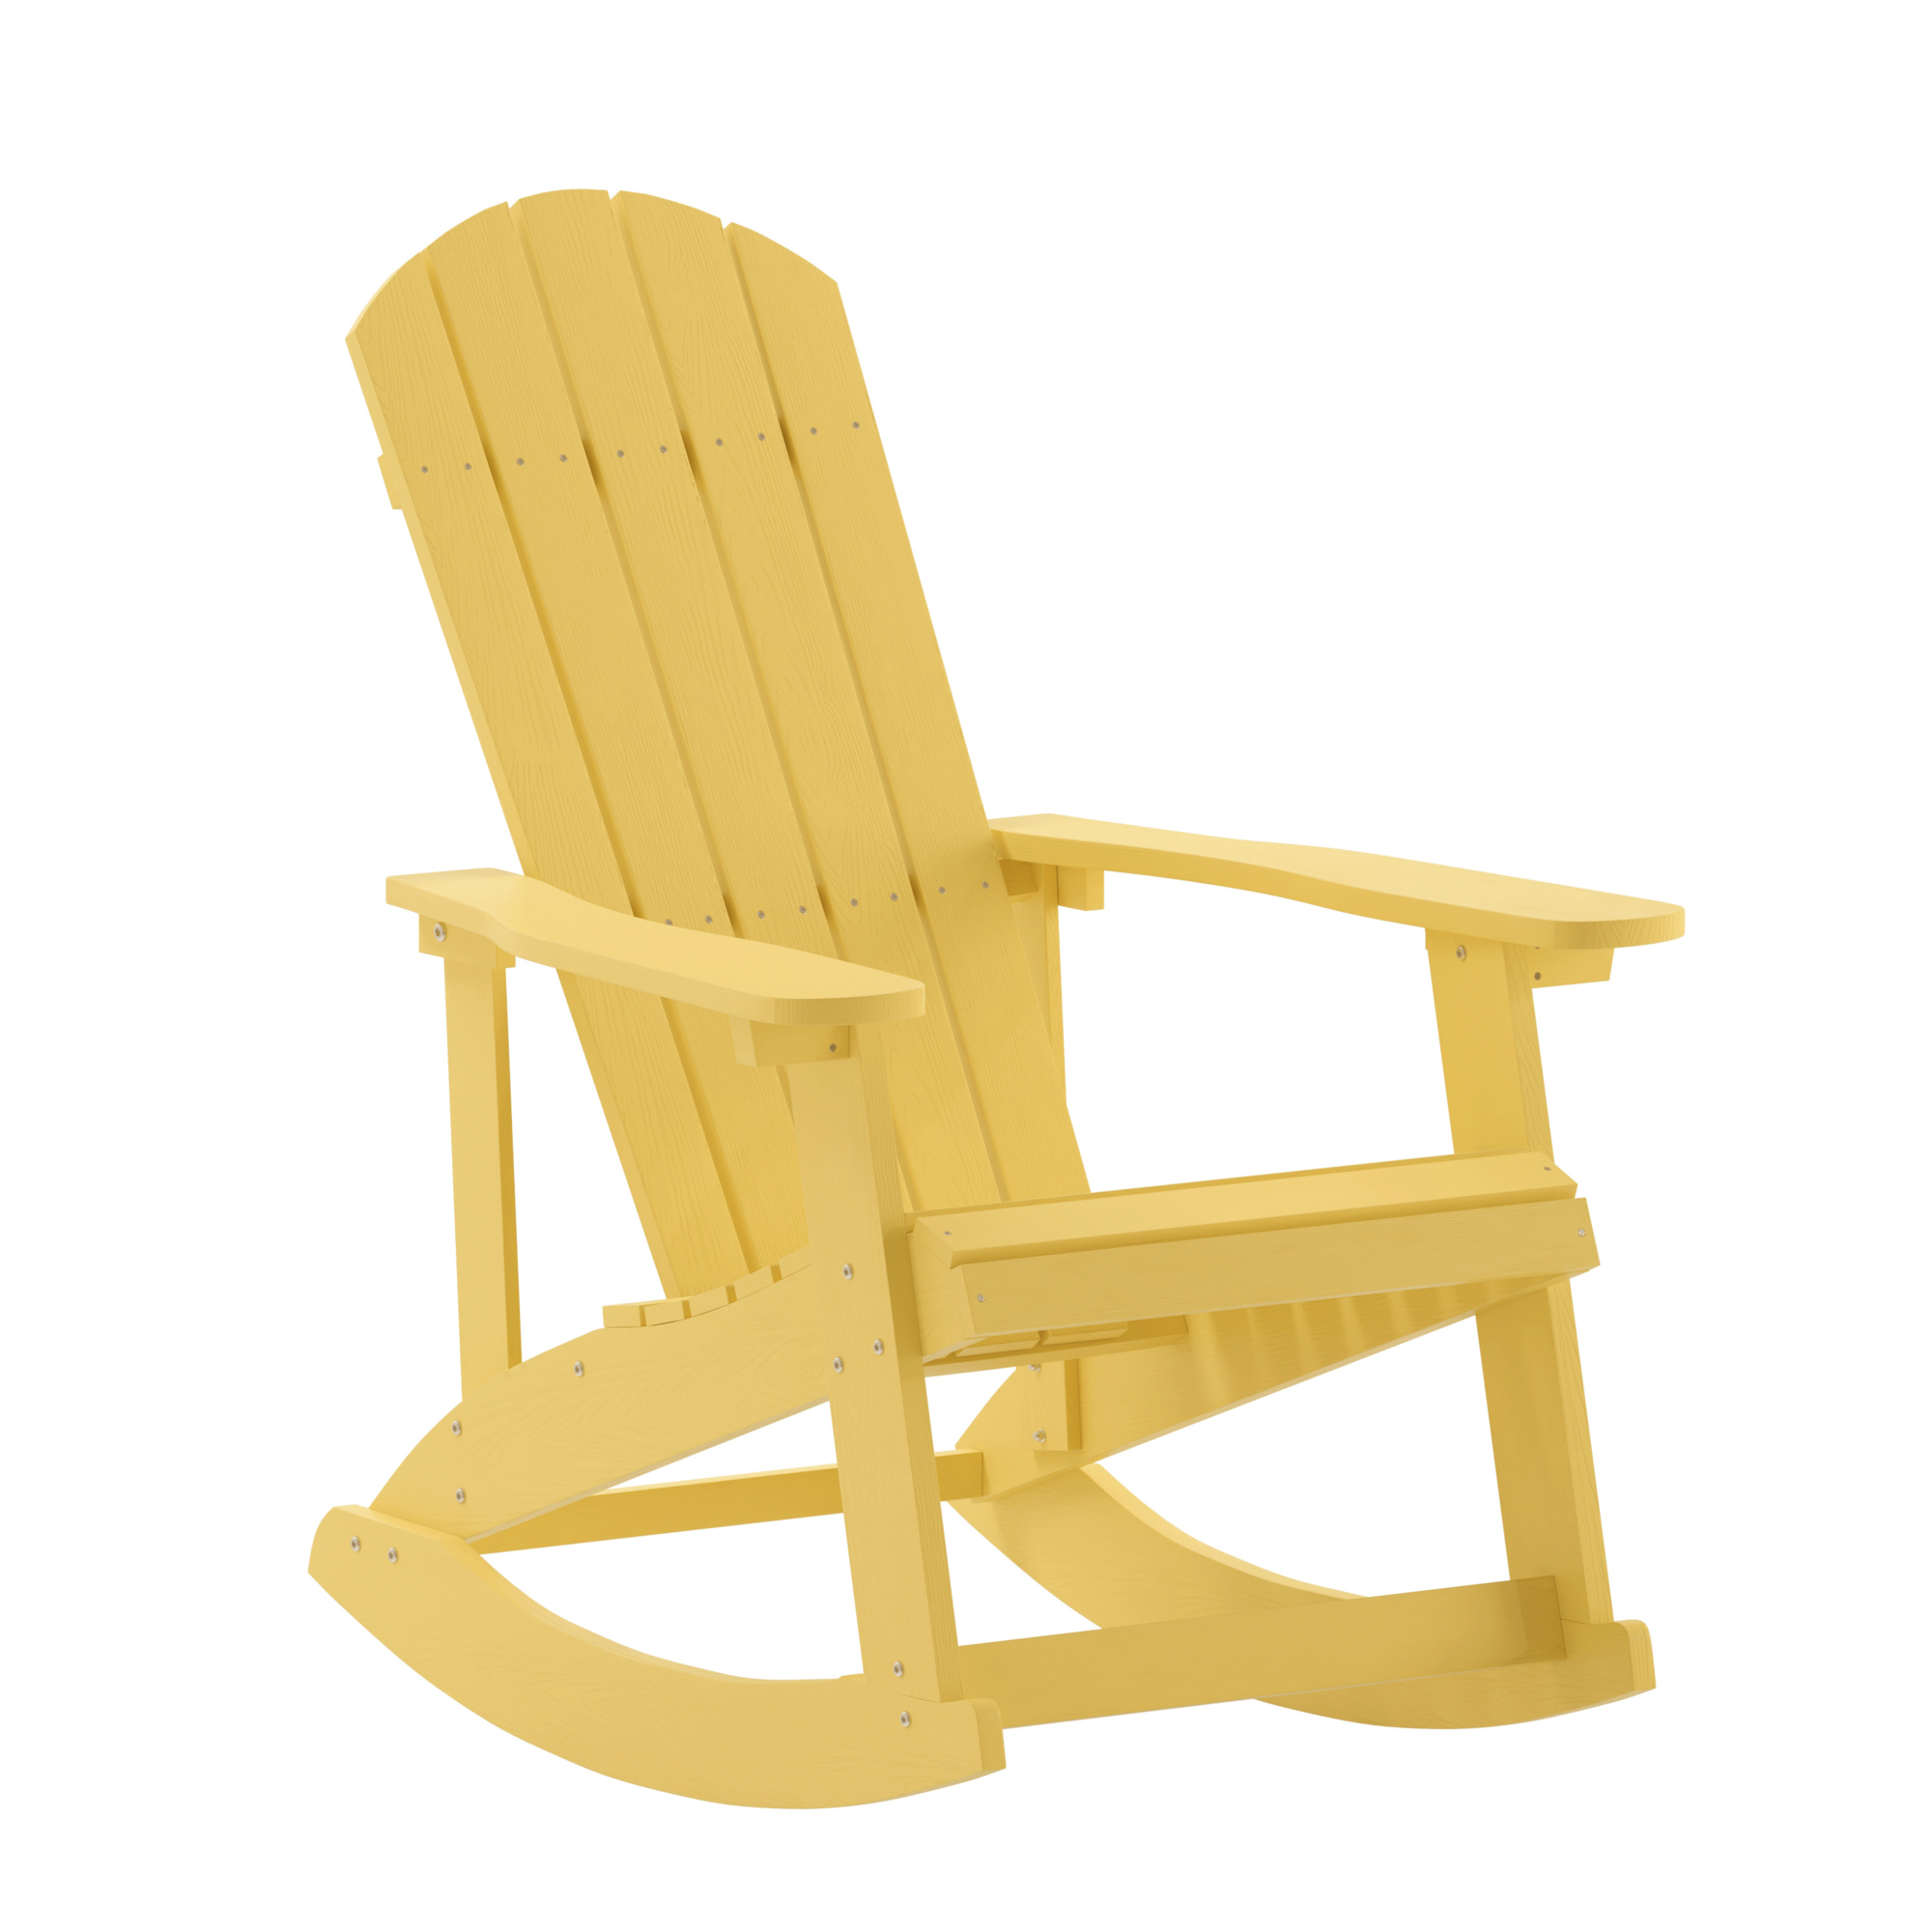 Flash Furniture, Yellow Poly Resin Adirondack Style Rocking Chair, Primary Color Yellow, Material Polystyrene, Width 29.5 in, Model JJC14705YLW